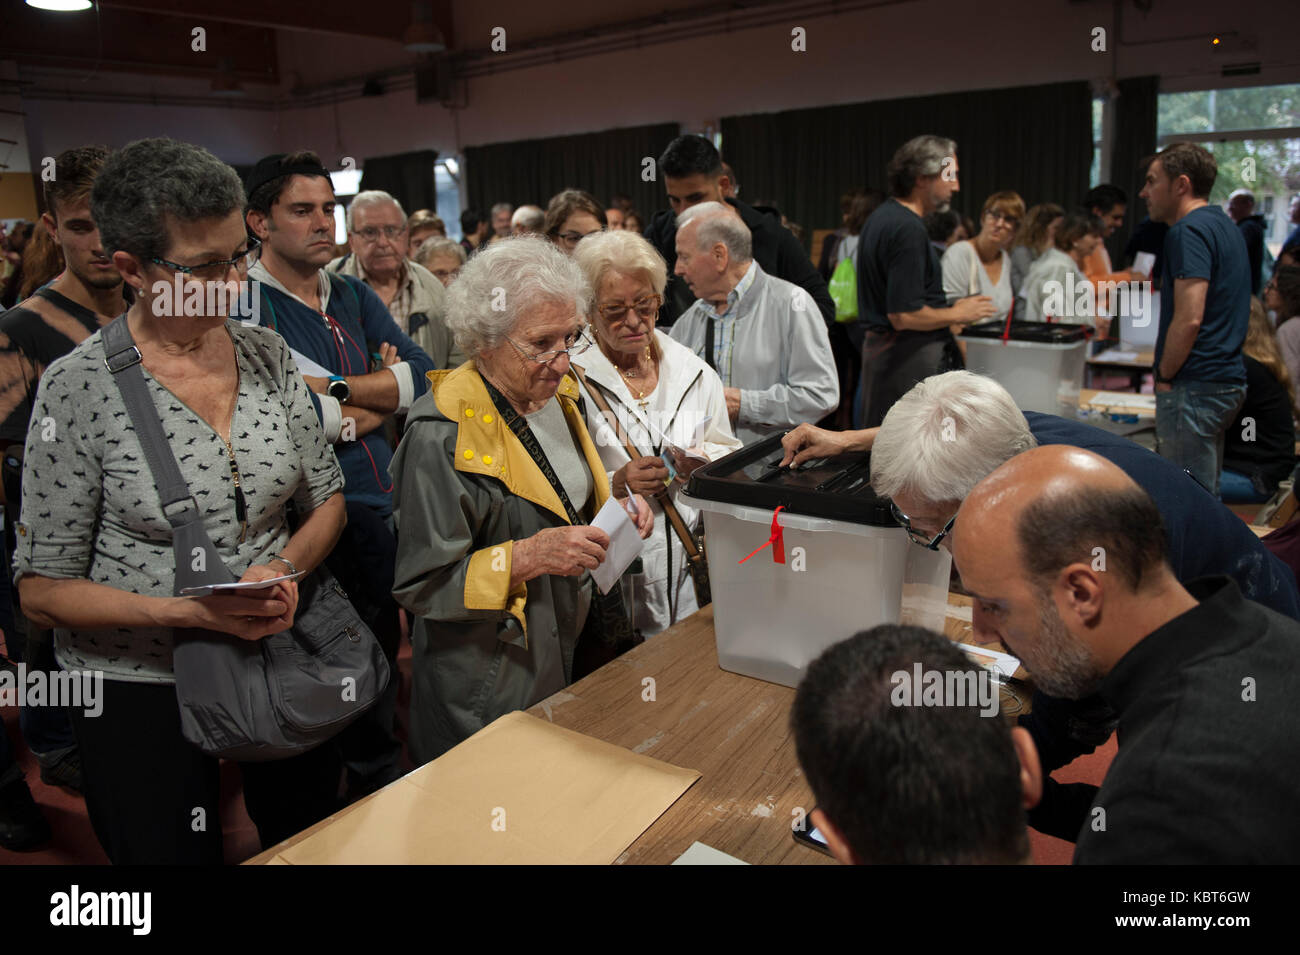 Barcelona, Catalonia. October 1, 2017. Spain. Voters collect ballots and vote in the electoral college llacuna where the vote is being made with total normality. Credit: Charlie Perez/Alamy Live News Stock Photo